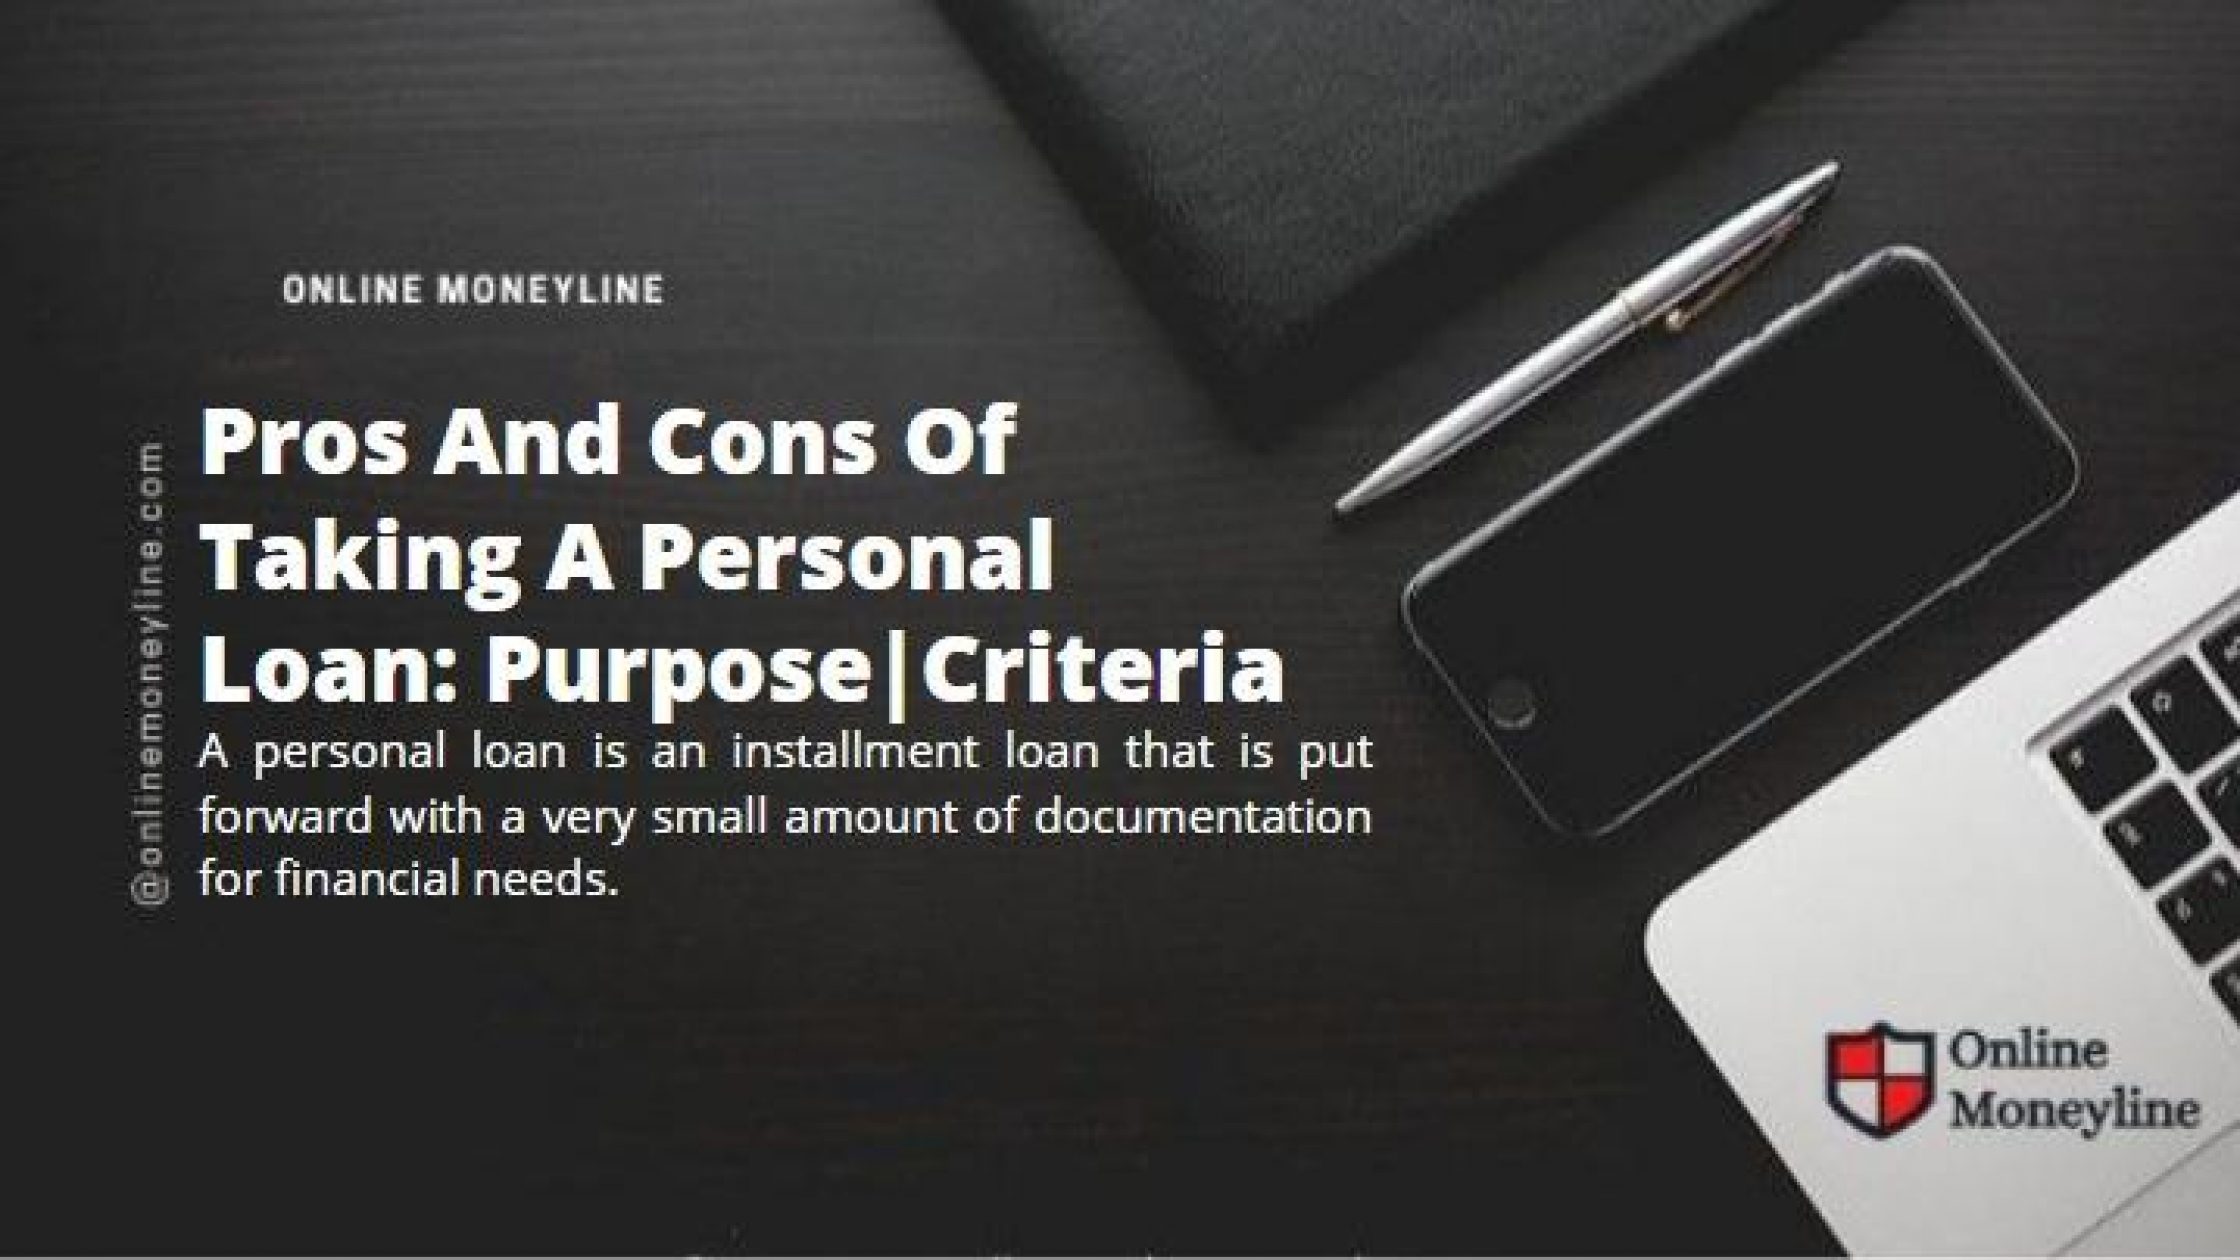 Pros And Cons Of Taking A Personal Loan: Purpose|Criteria